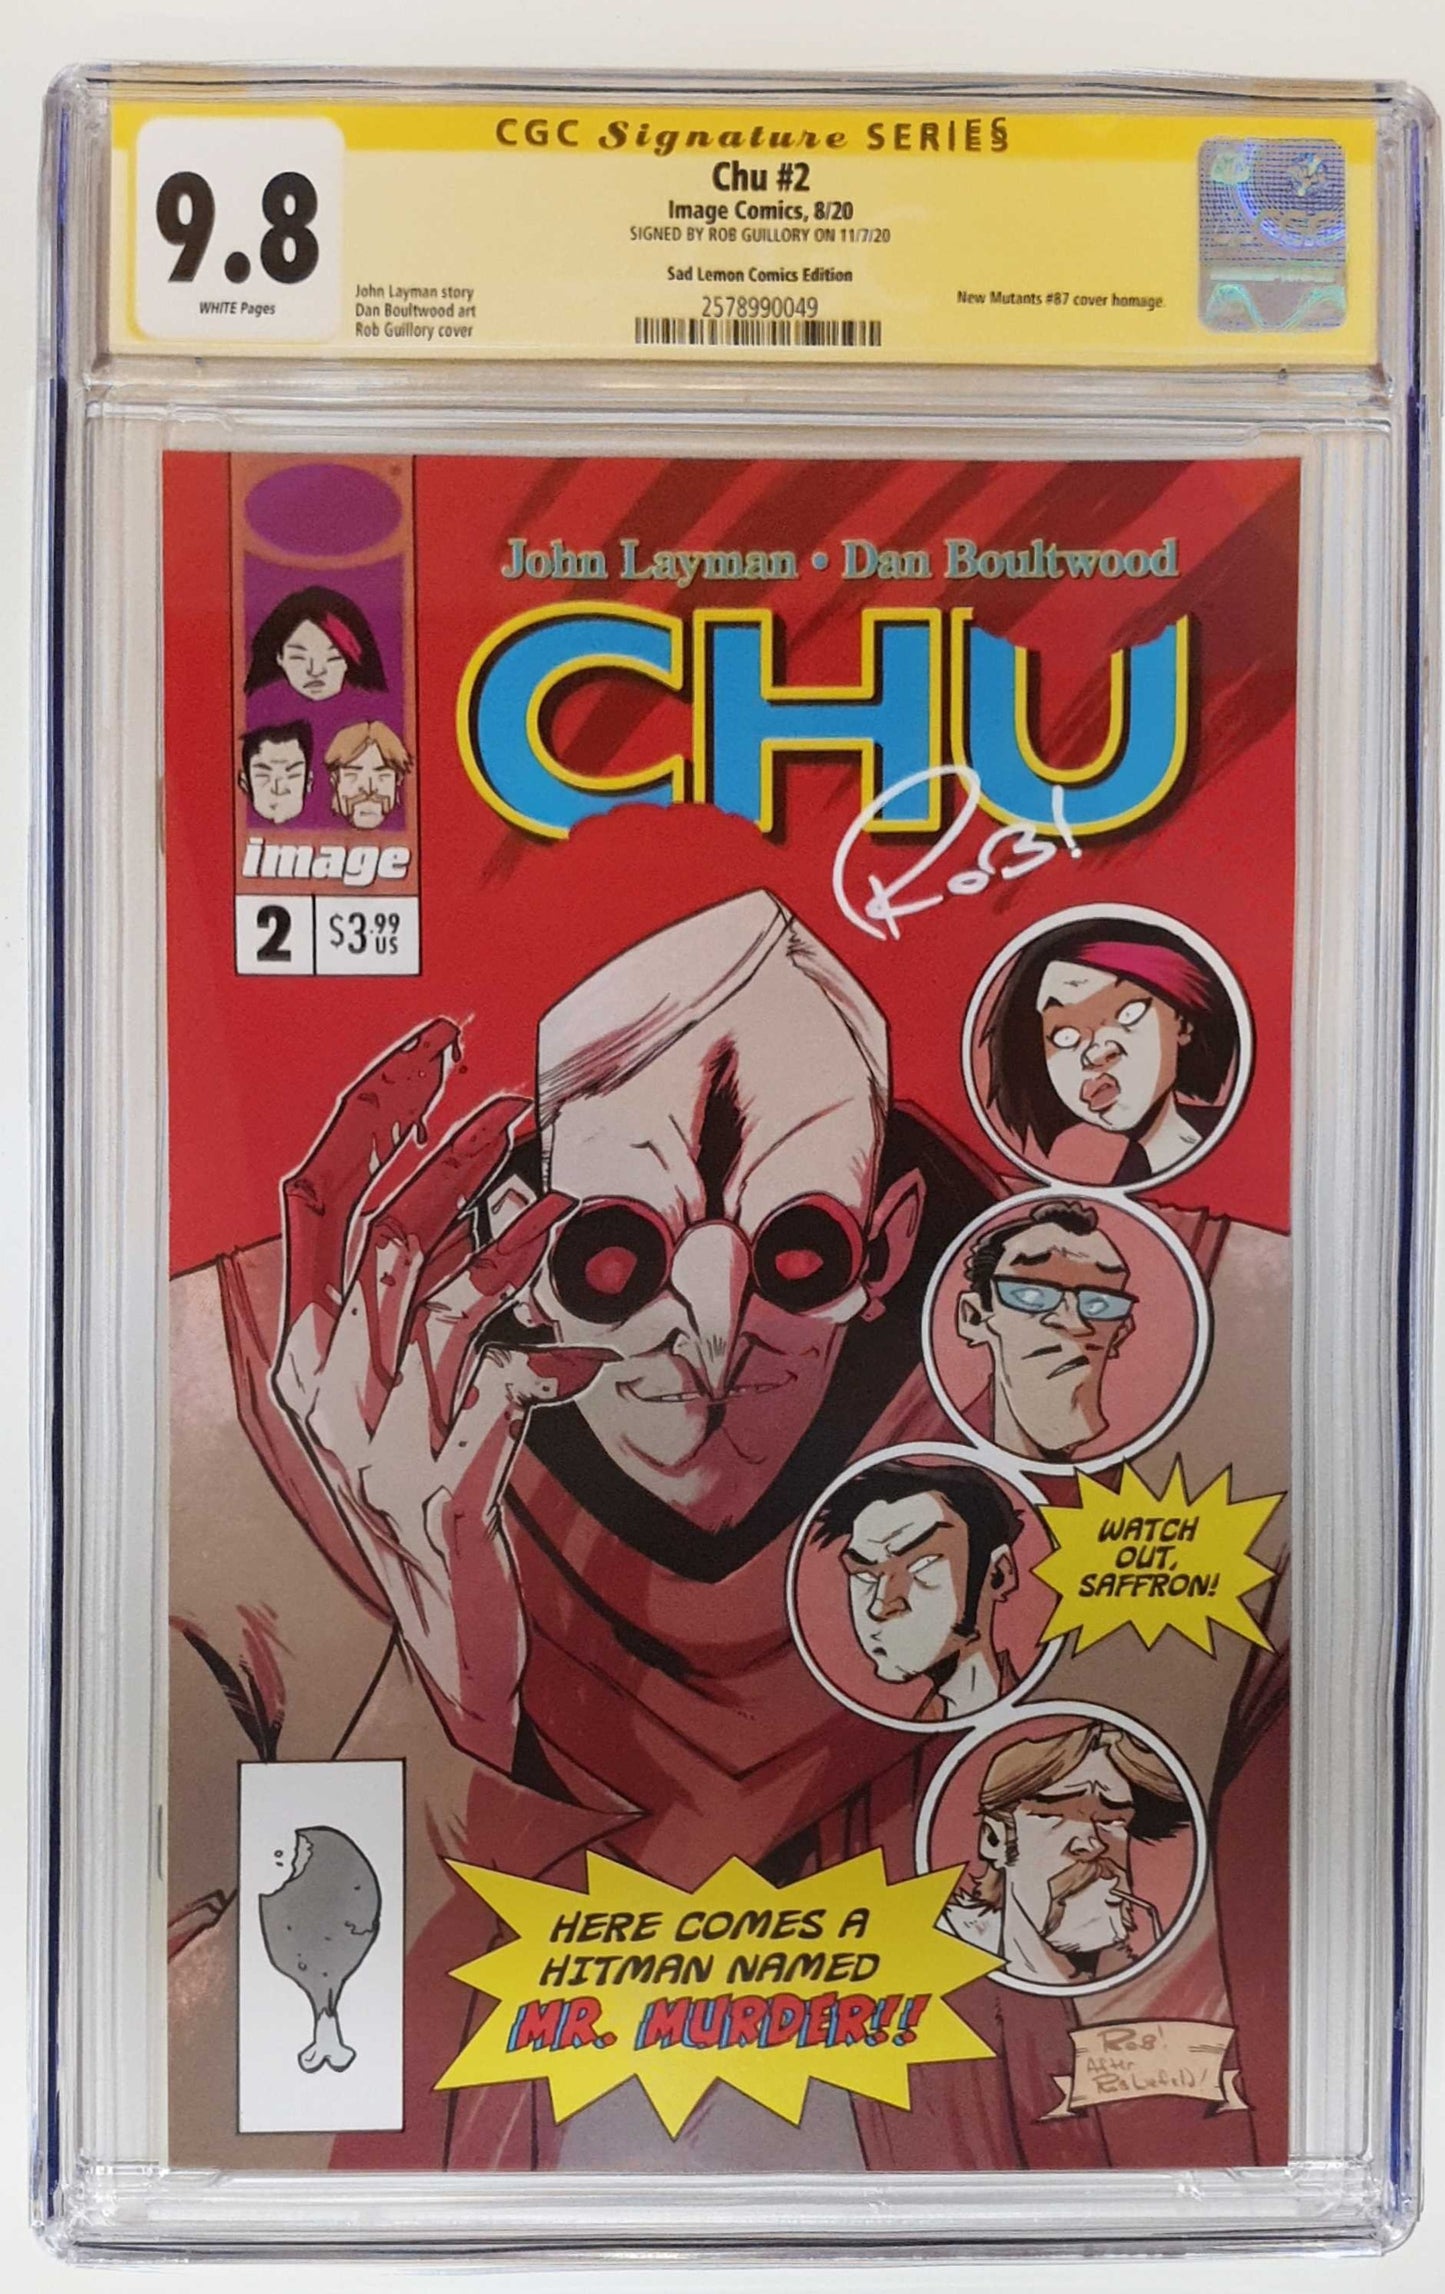 CHU #2 ROB GUILLORY NEW MUTANTS 87 HOMAGE VARIANT LIMITED TO 500 CGC 9.8 SS